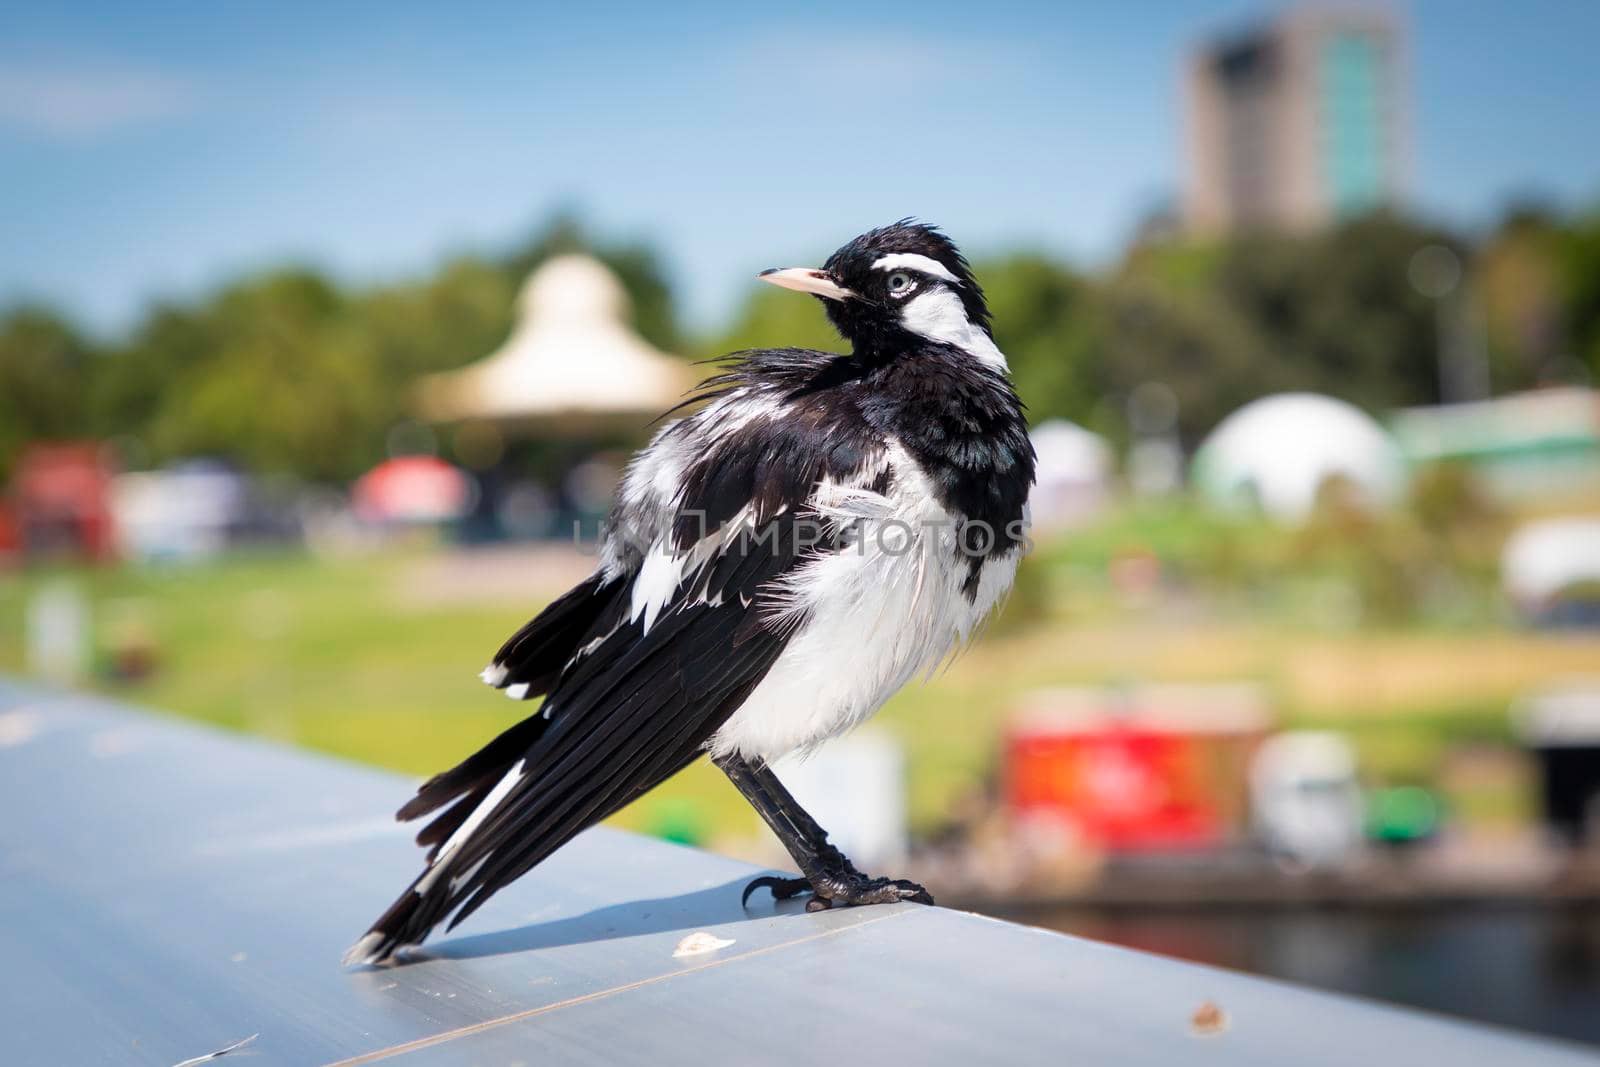 A black and white magpie bird sitting on an aluminium hand rail in the sunshine